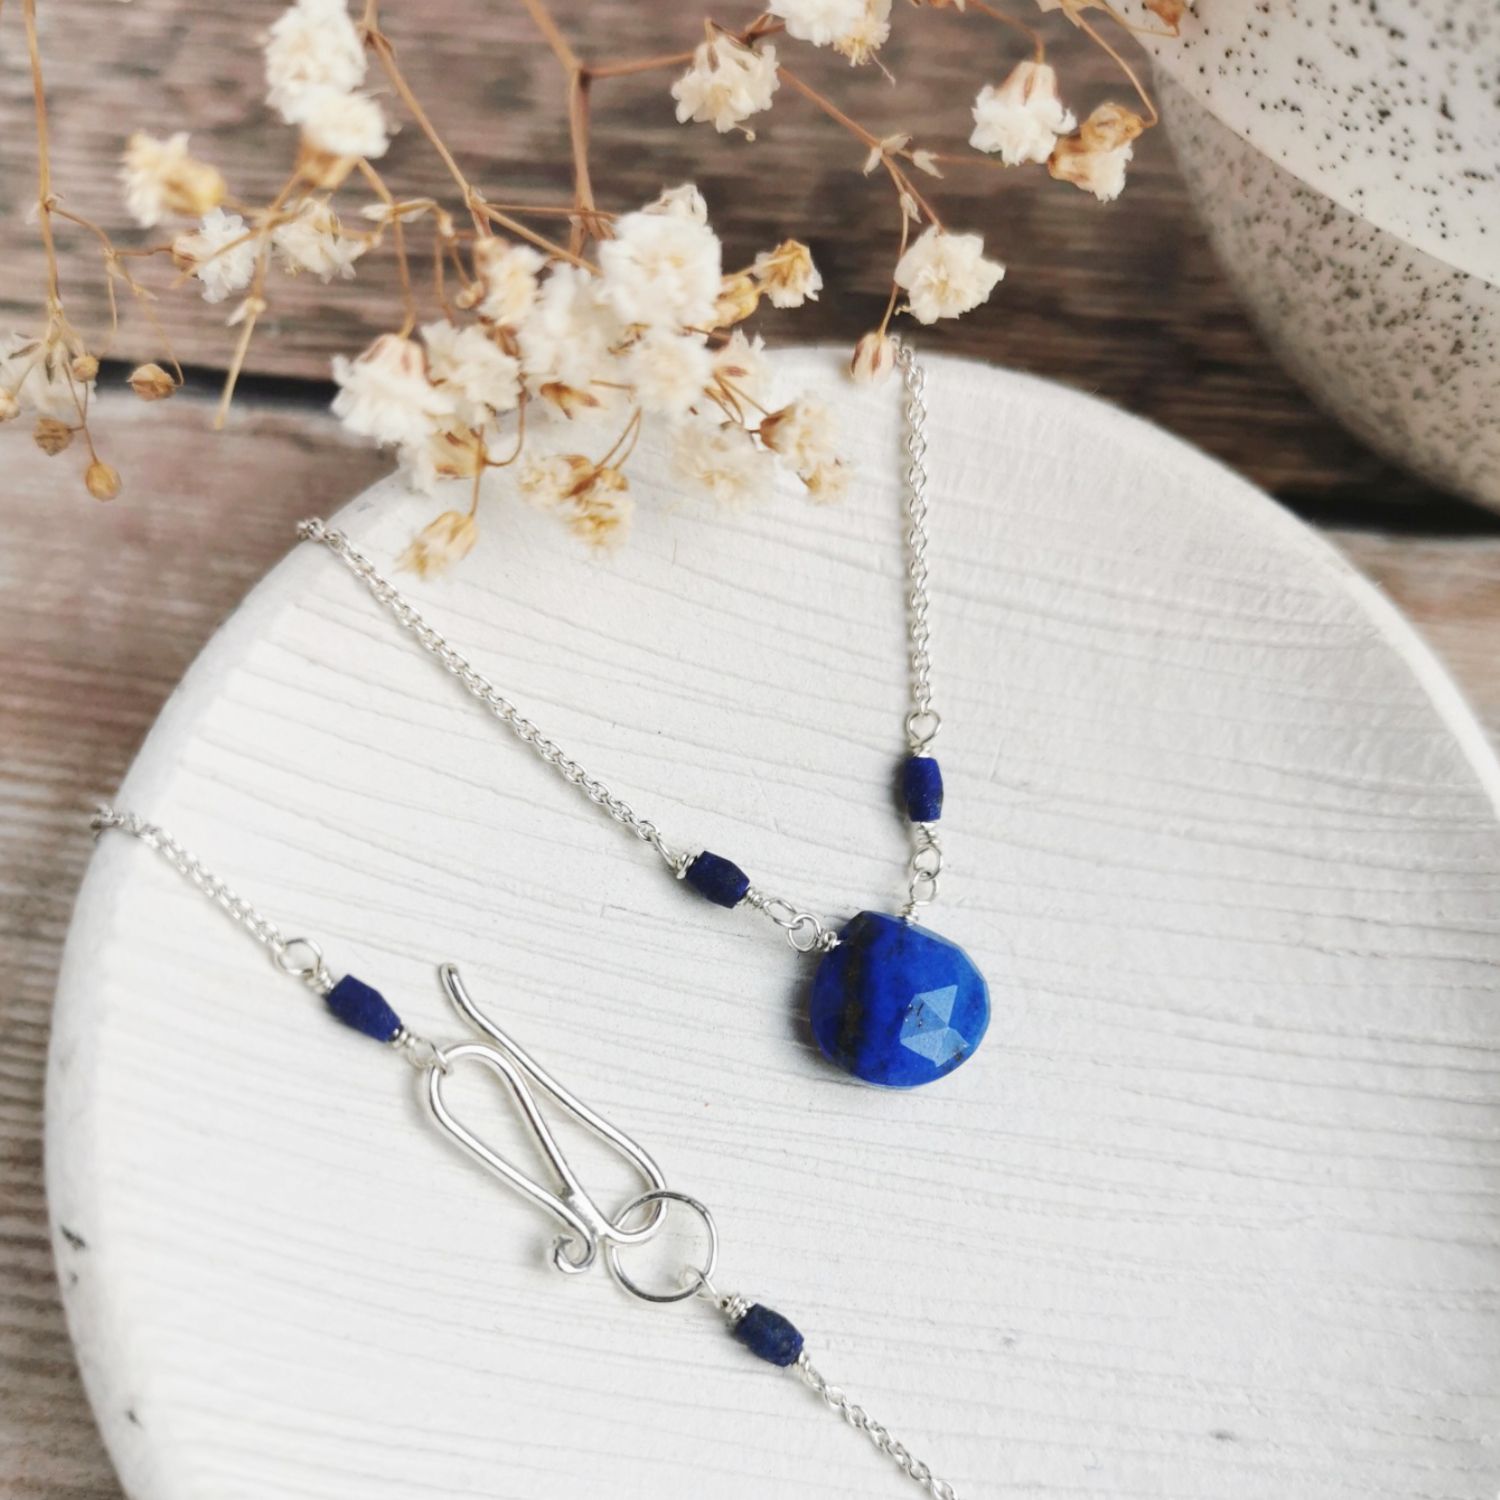 Wire Wrapped Pendant Jewelry Workshop – Assembly: gather + create